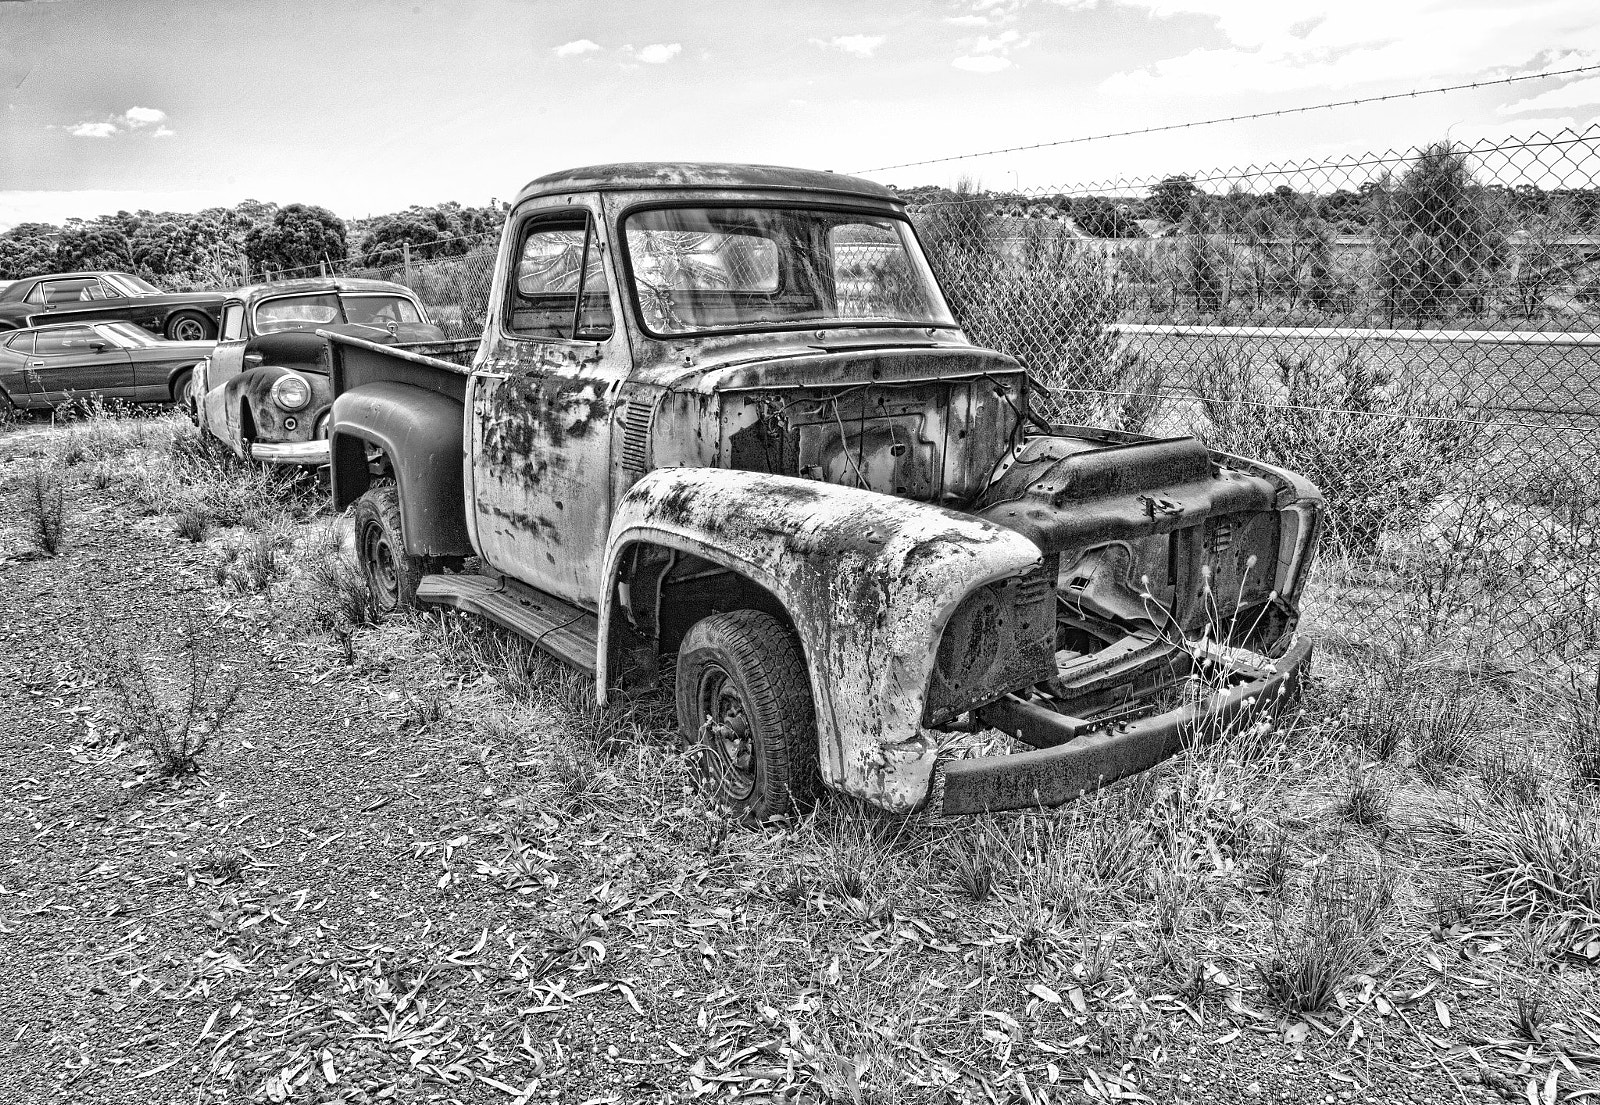 Canon EOS 6D + Sigma 24-105mm f/4 DG OS HSM | A sample photo. Rusty ute b&w photography